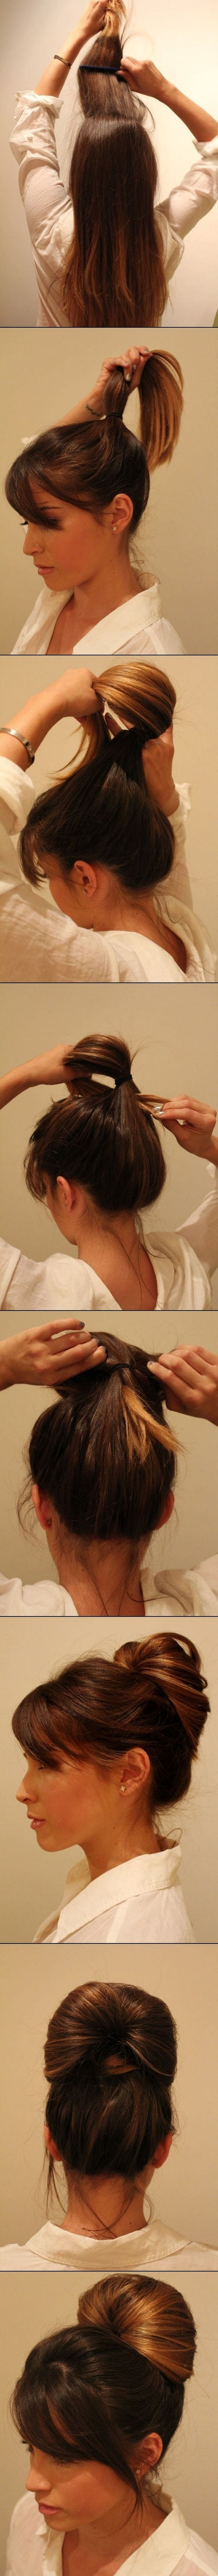 25 Lazy Girl Hair Hacks - An easy hair updo that doesn't even require bobby pins.